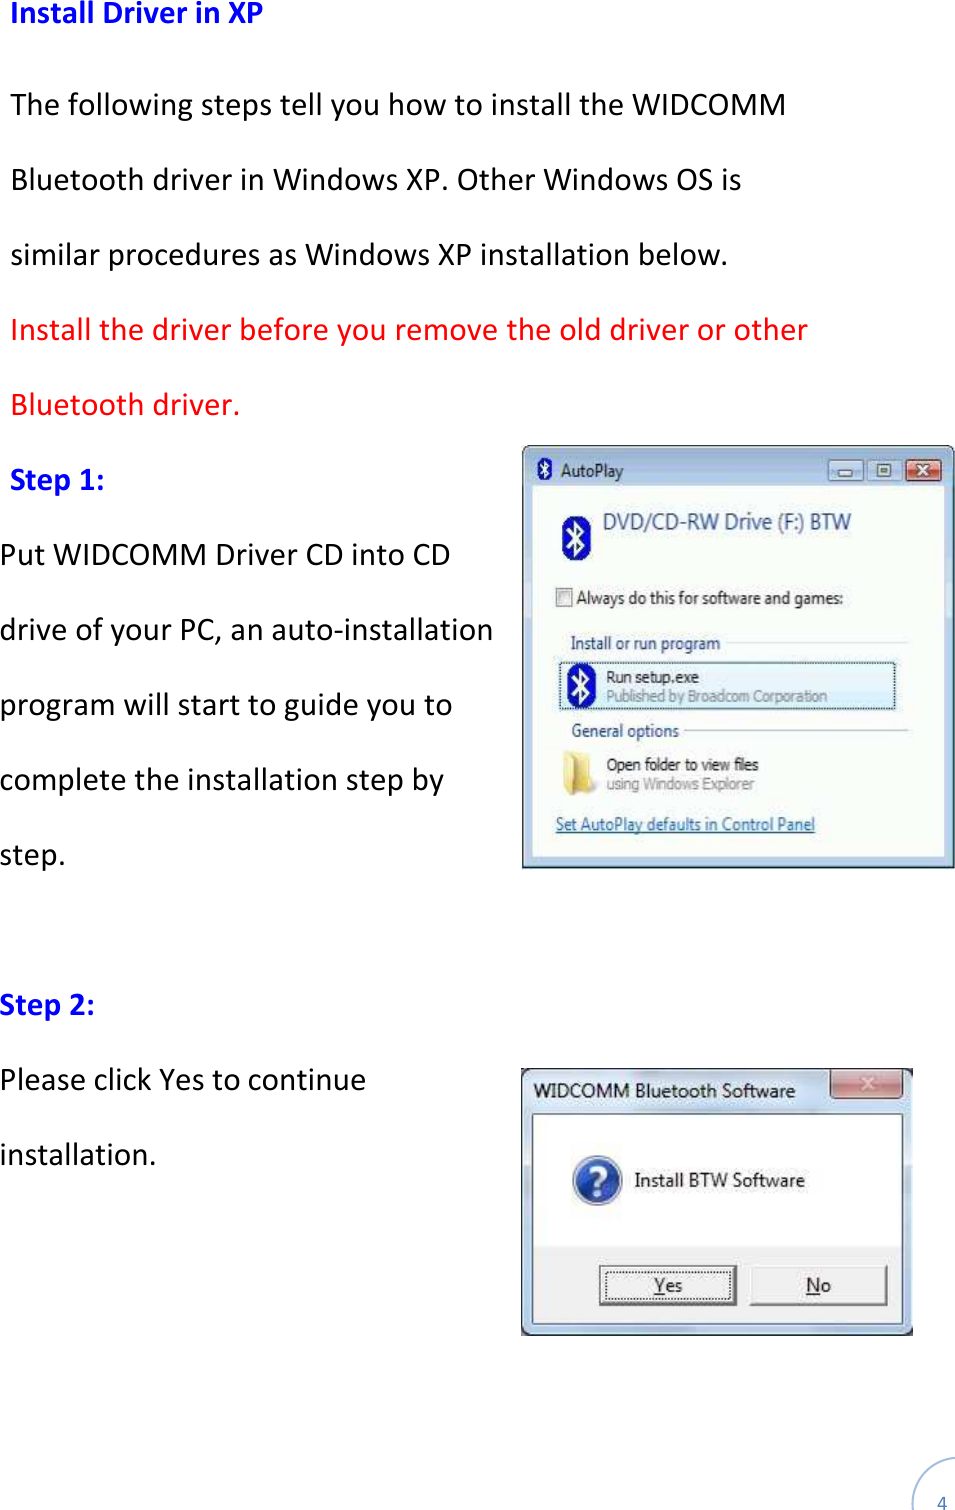  4 Install Driver in XP  The following steps tell you how to install the WIDCOMM Bluetooth driver in Windows XP. Other Windows OS is similar procedures as Windows XP installation below. Install the driver before you remove the old driver or other Bluetooth driver. Step 1: Put WIDCOMM Driver CD into CD drive of your PC, an auto-installation program will start to guide you to complete the installation step by step.  Step 2:   Please click Yes to continue installation.    